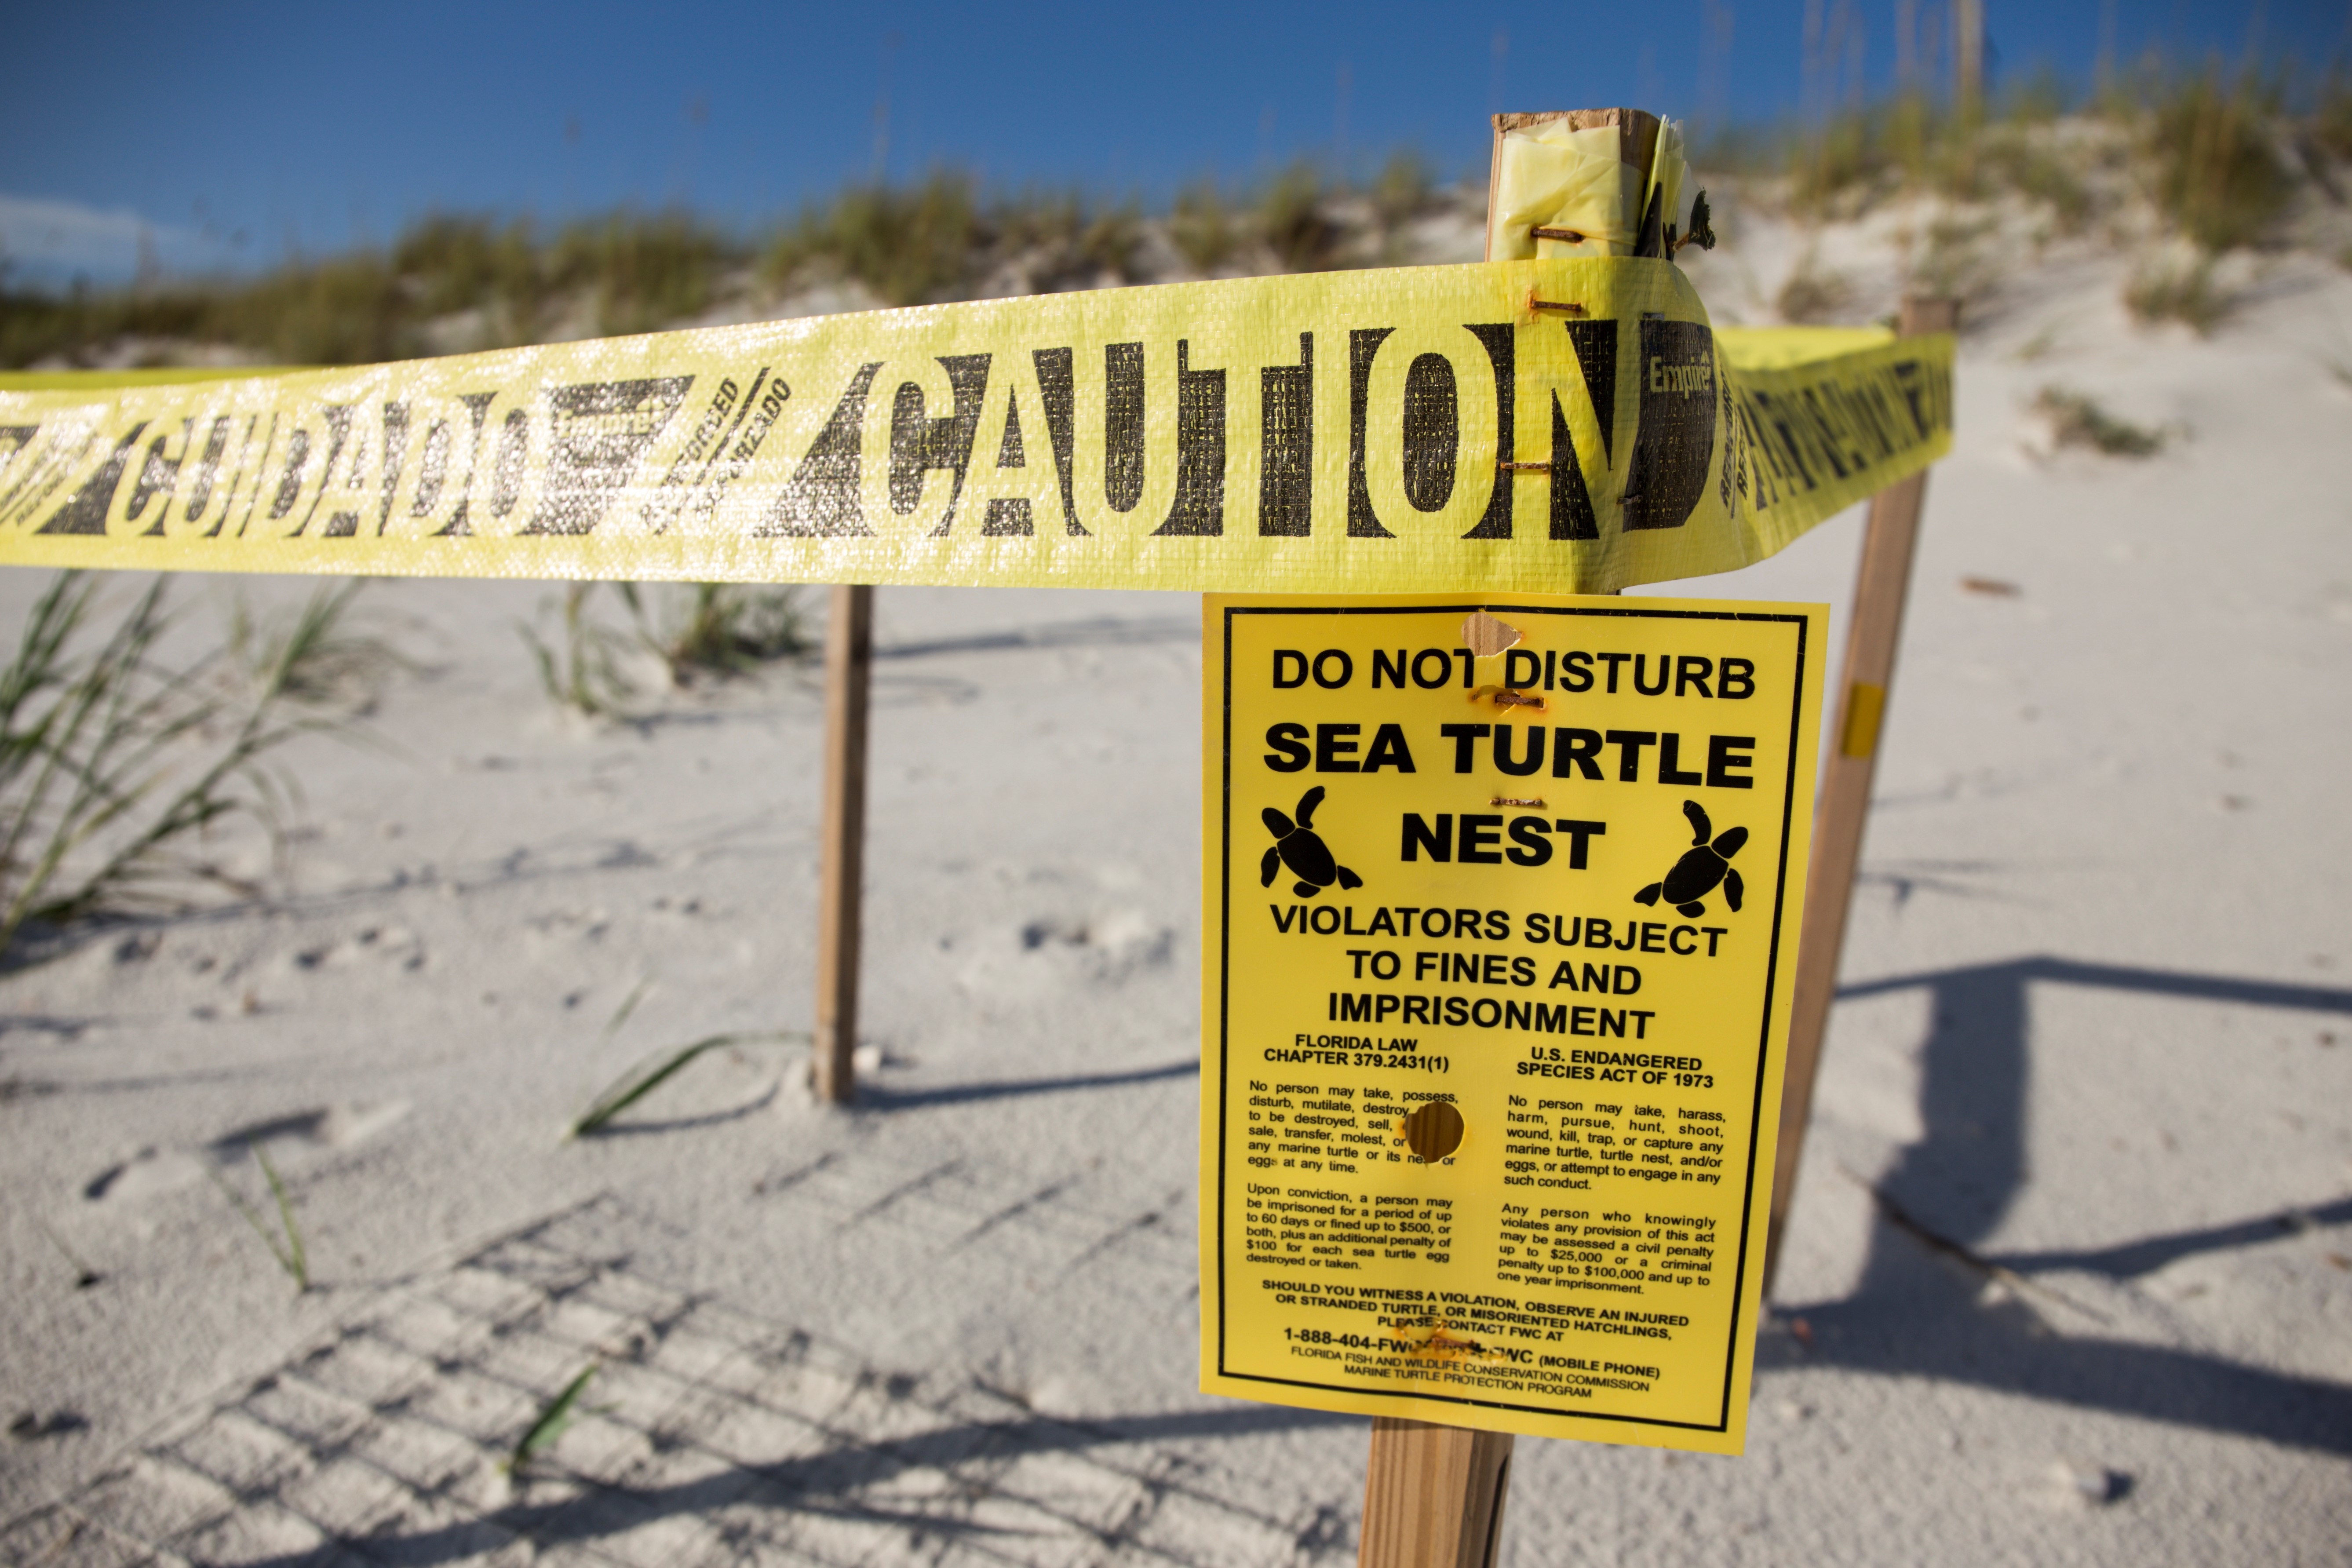 IV. Threats to Sea Turtles and Their Nests